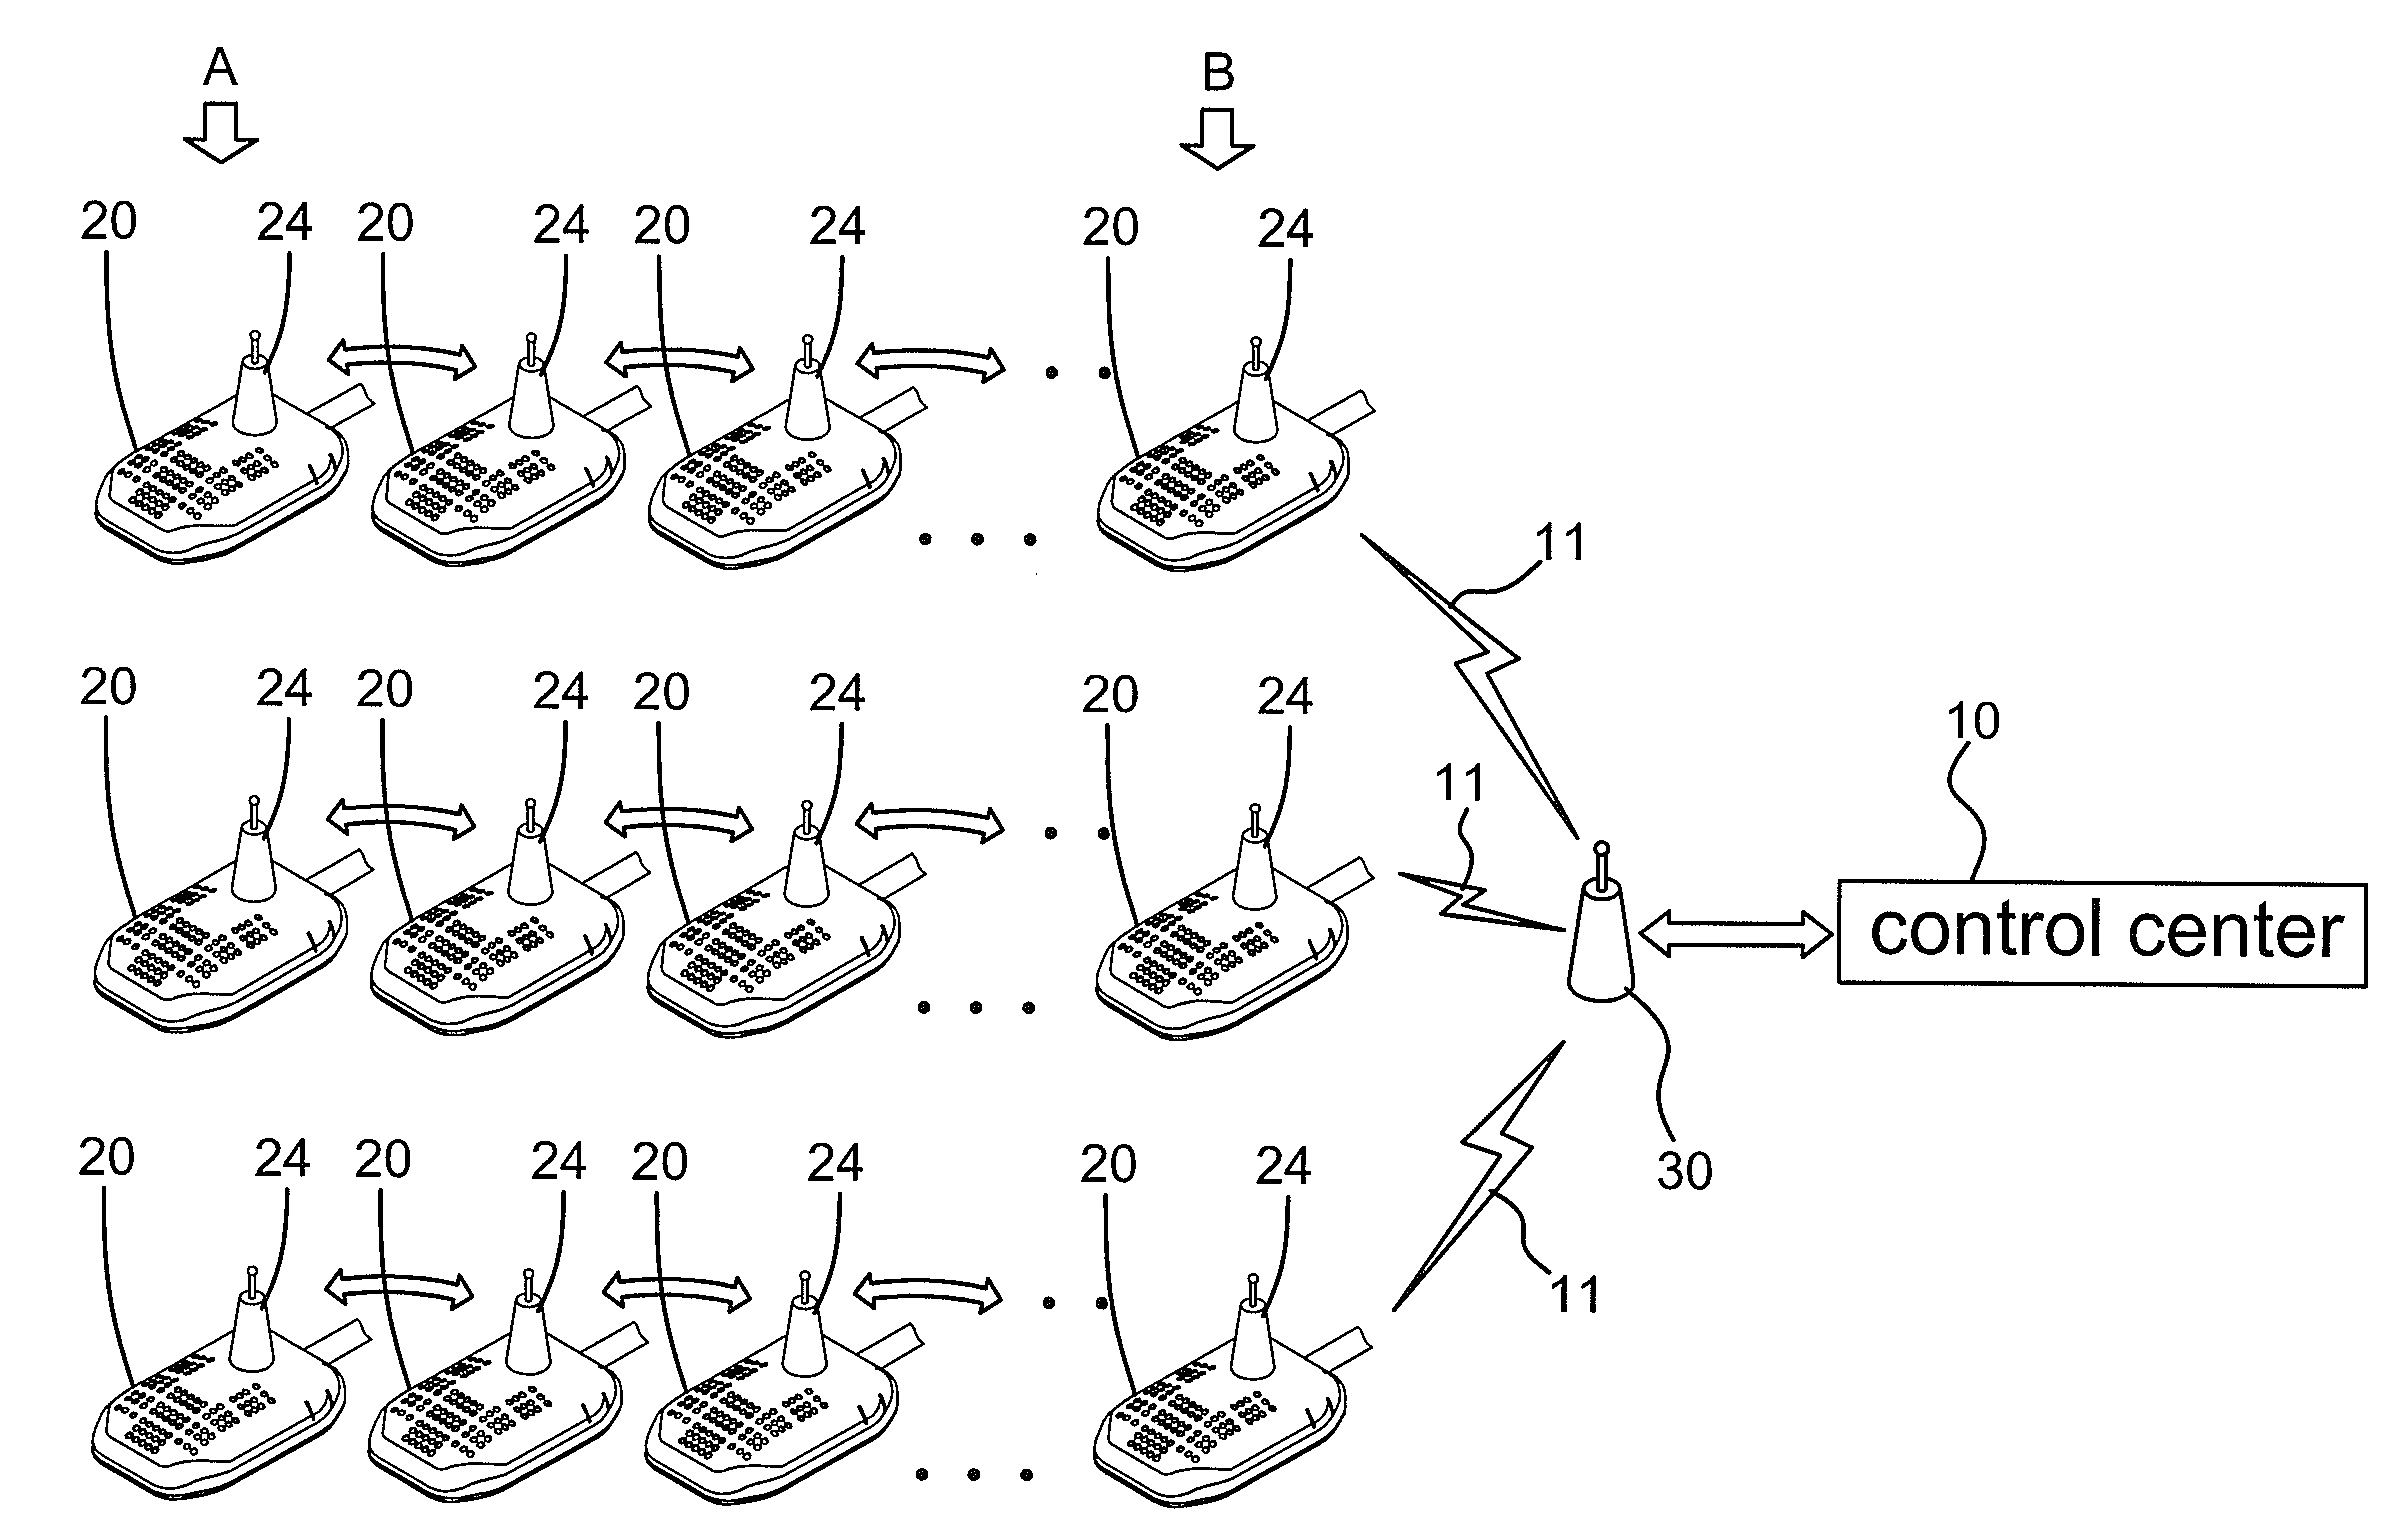 Wireless Remote Control System and Methods for Monitoring and Controlling Illuminating Devices